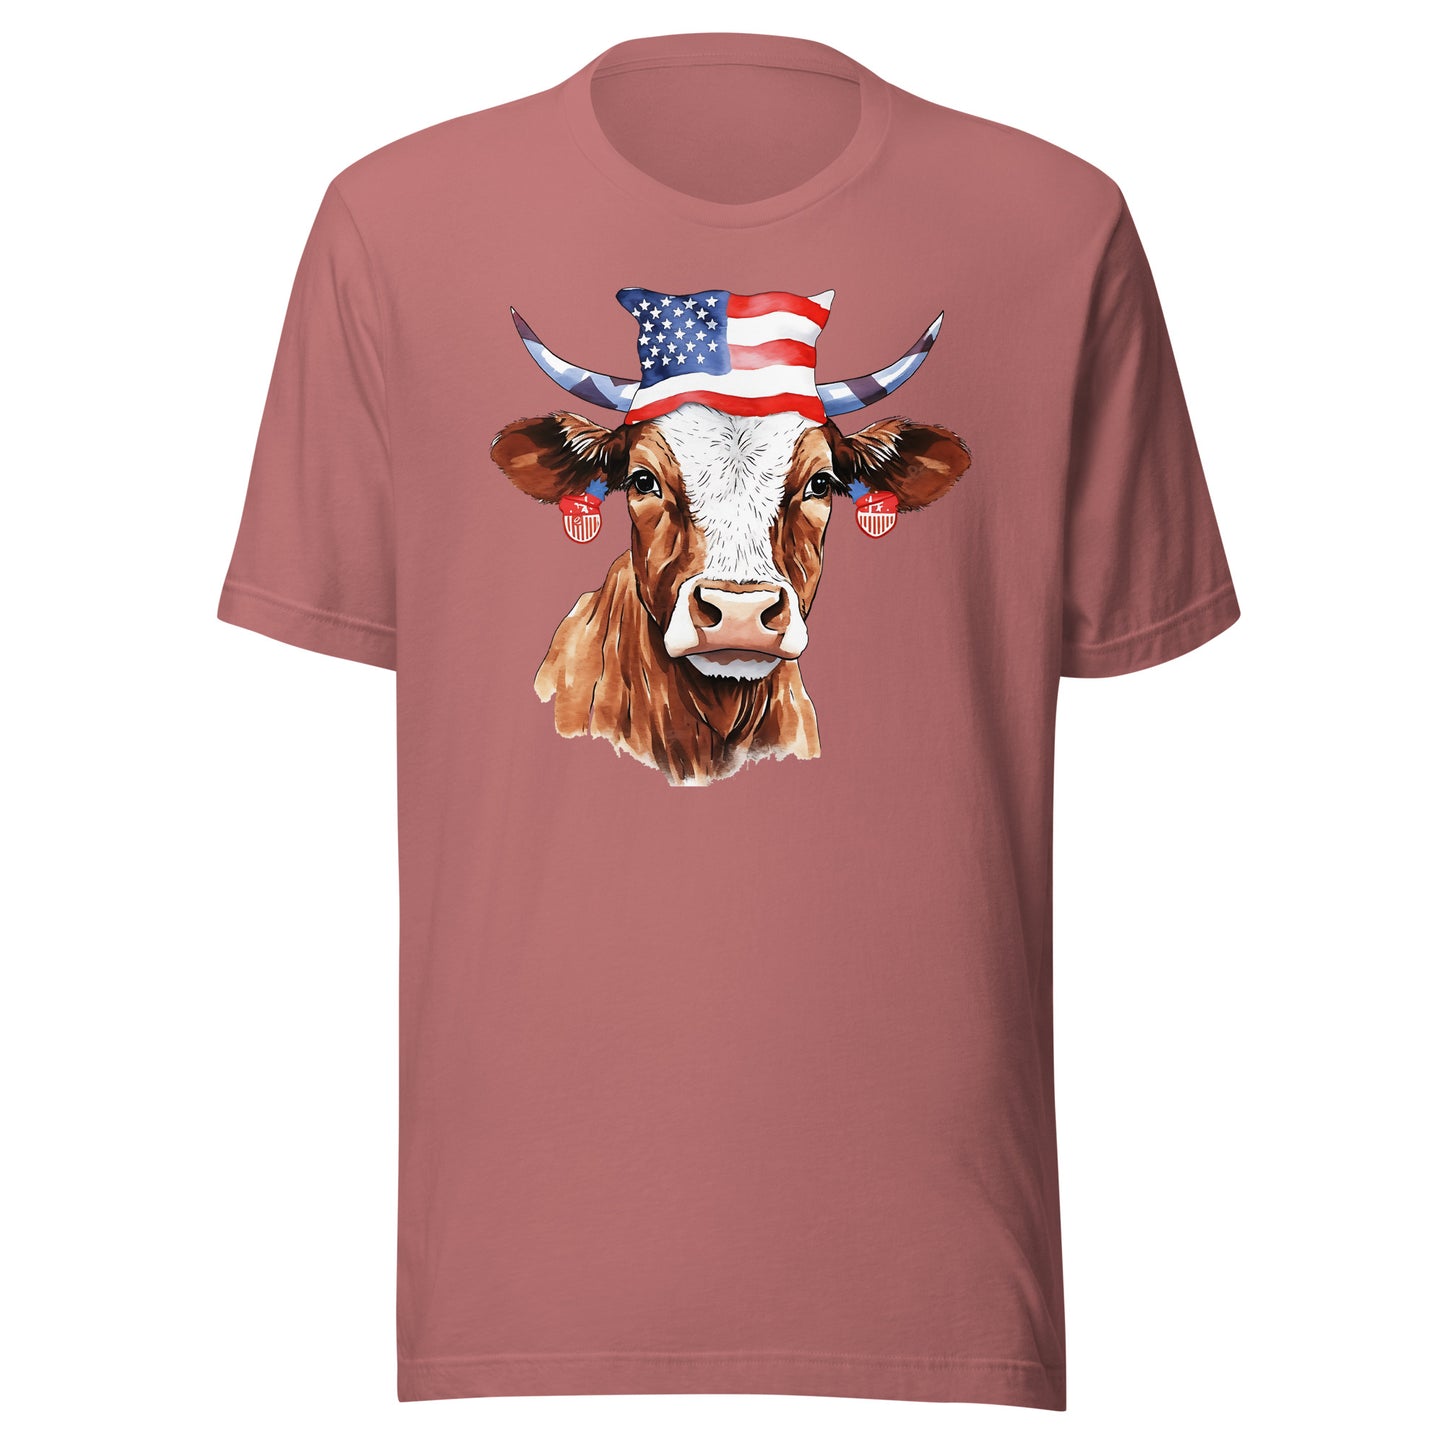 Patriotic Cow Tshirt For Cow Lovers Gift